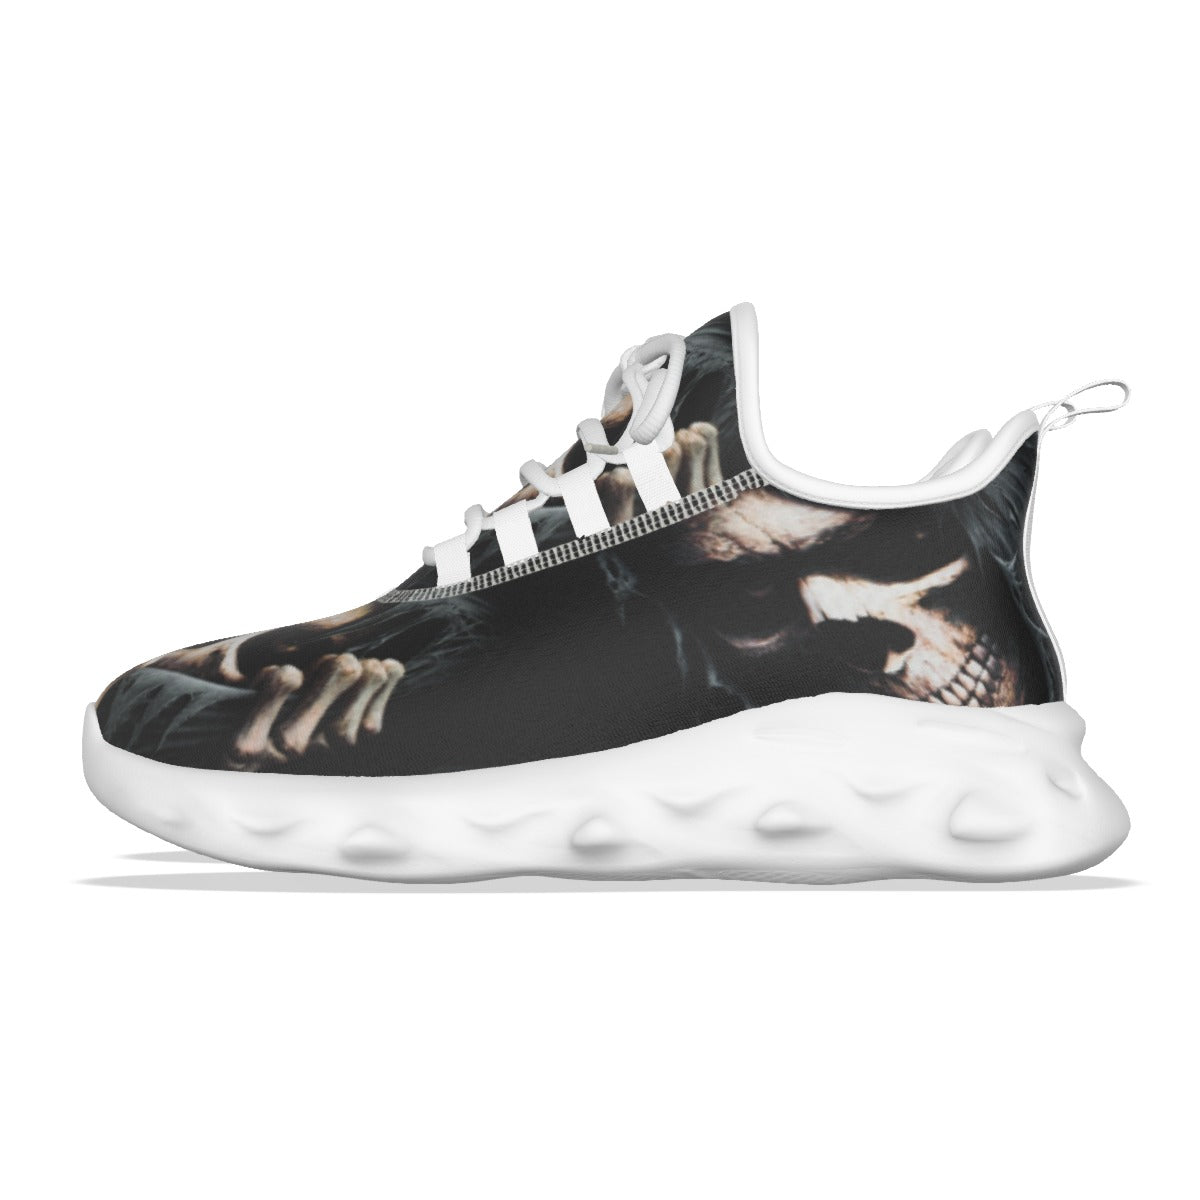 Day of the dead men's shoes sneakers